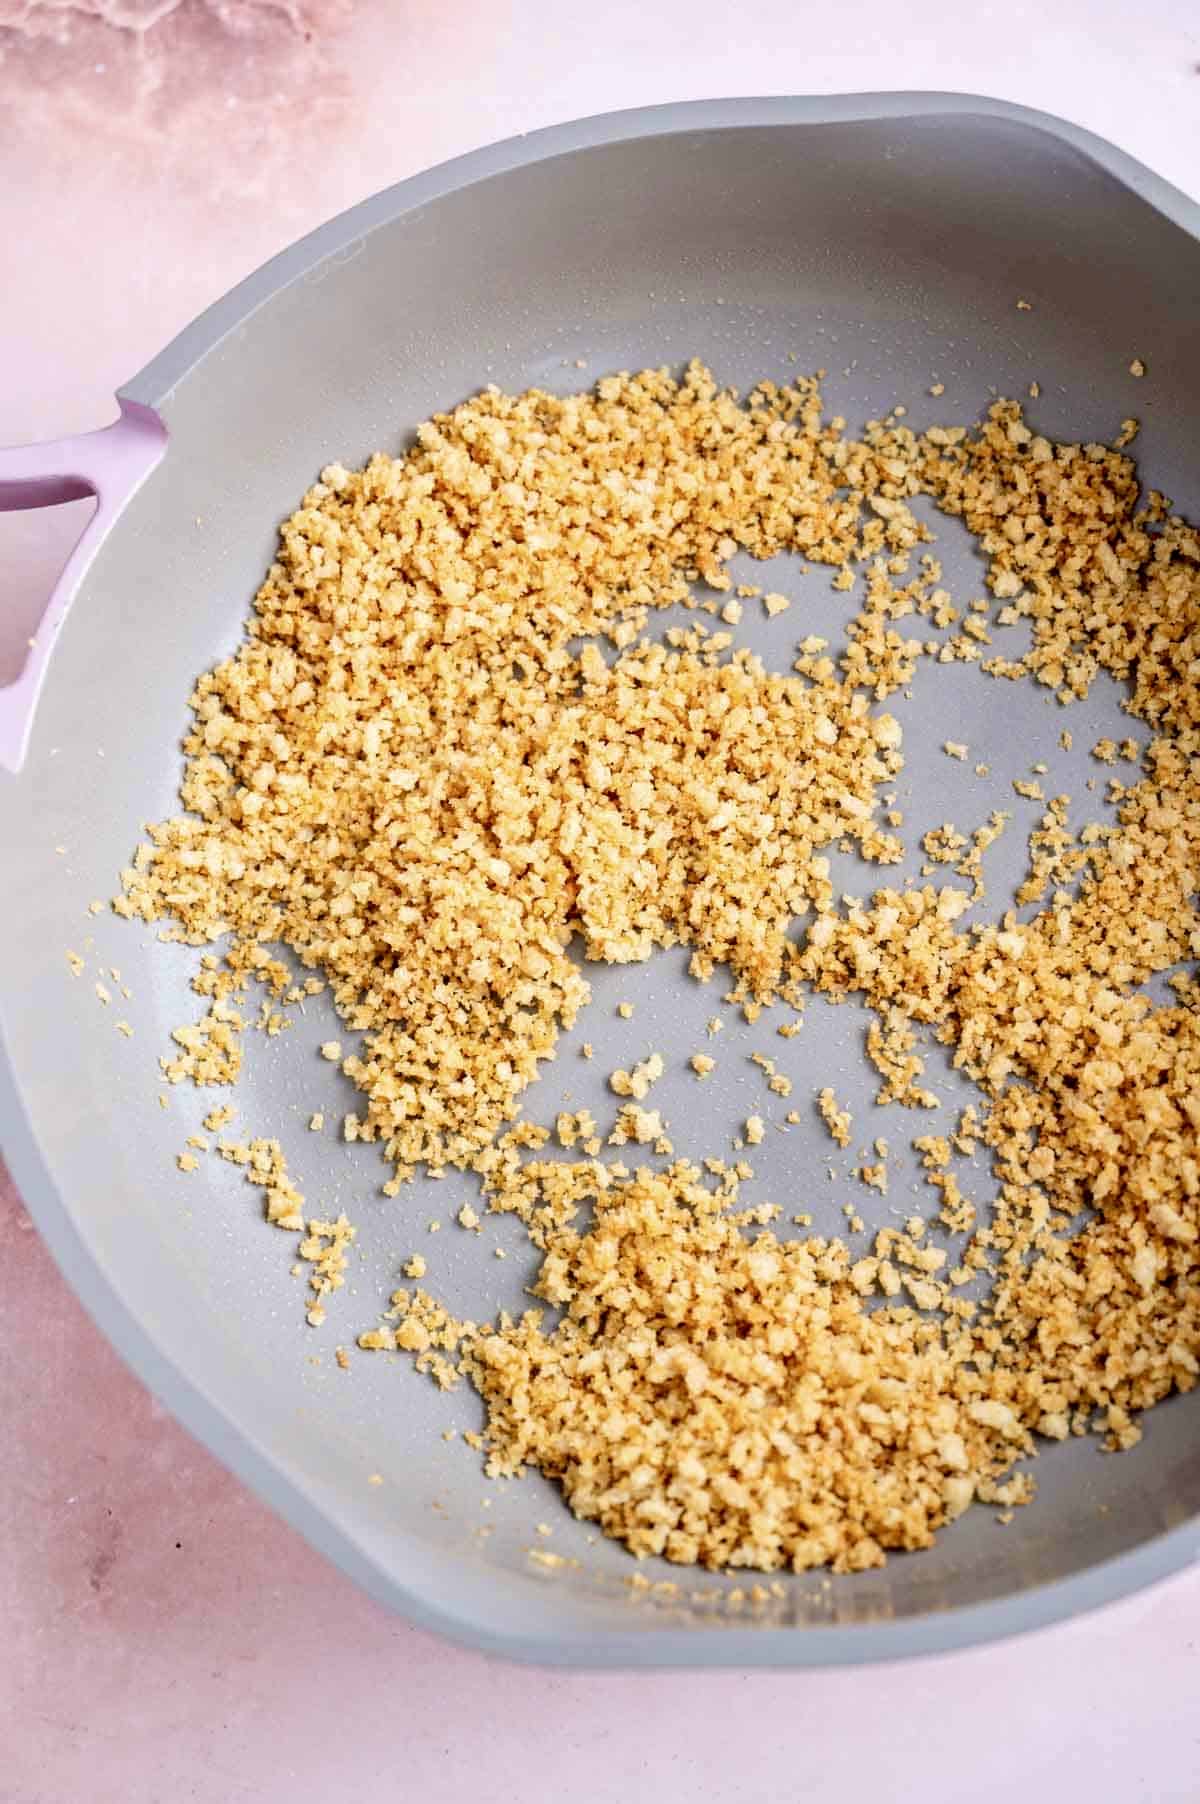 Toasted bread crumbs in a large frying pan.